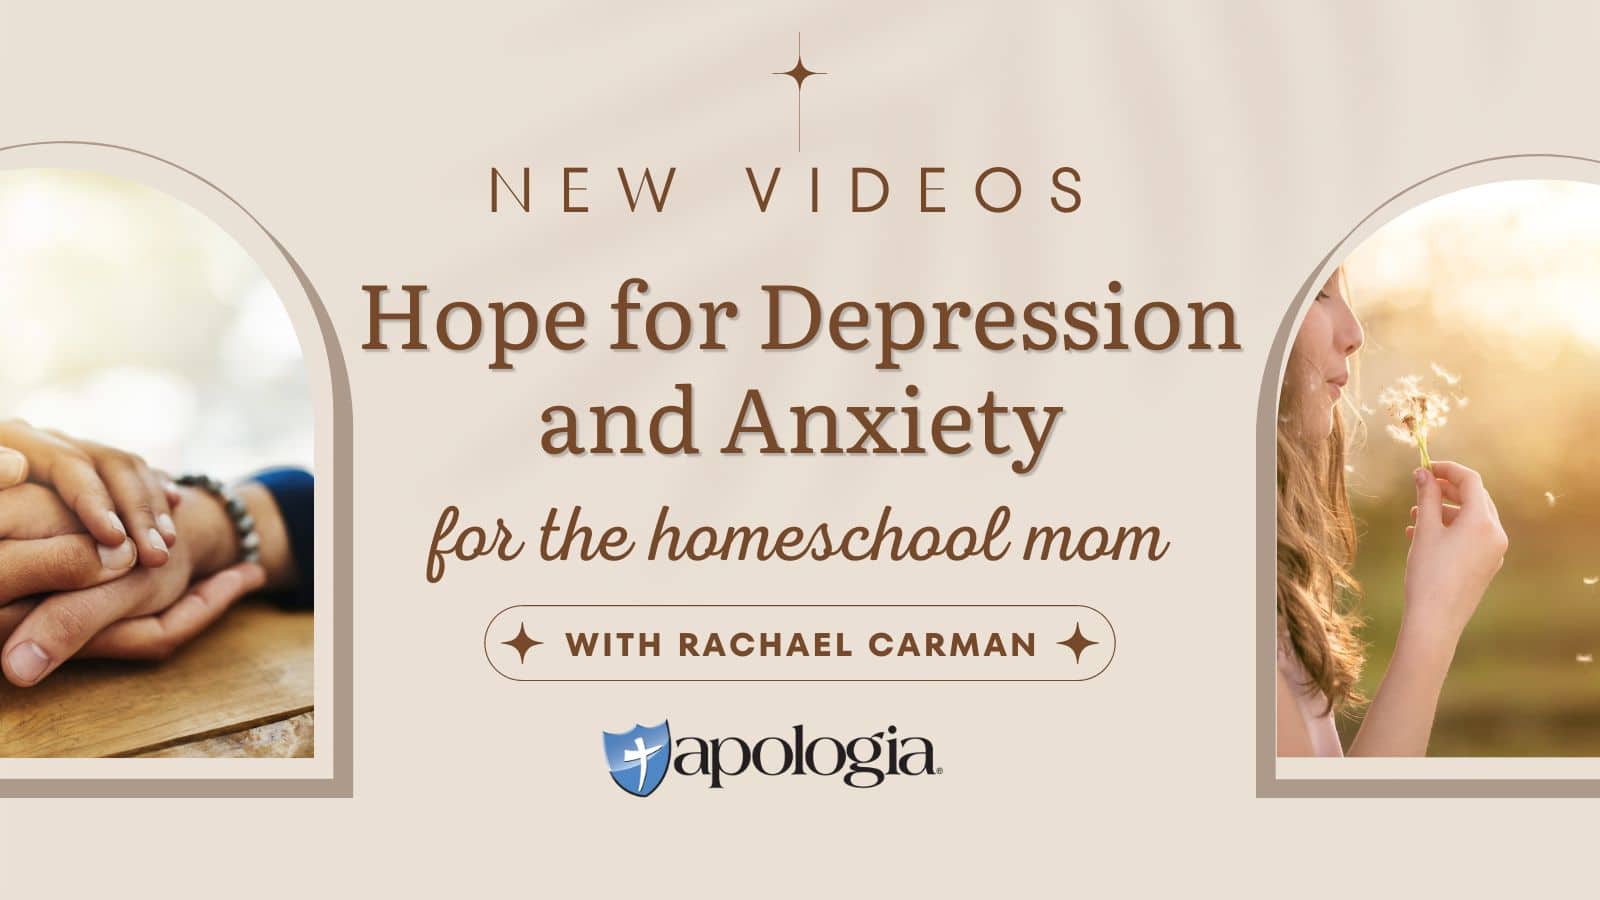 Hope for Homeschooling With Anxiety and Depression